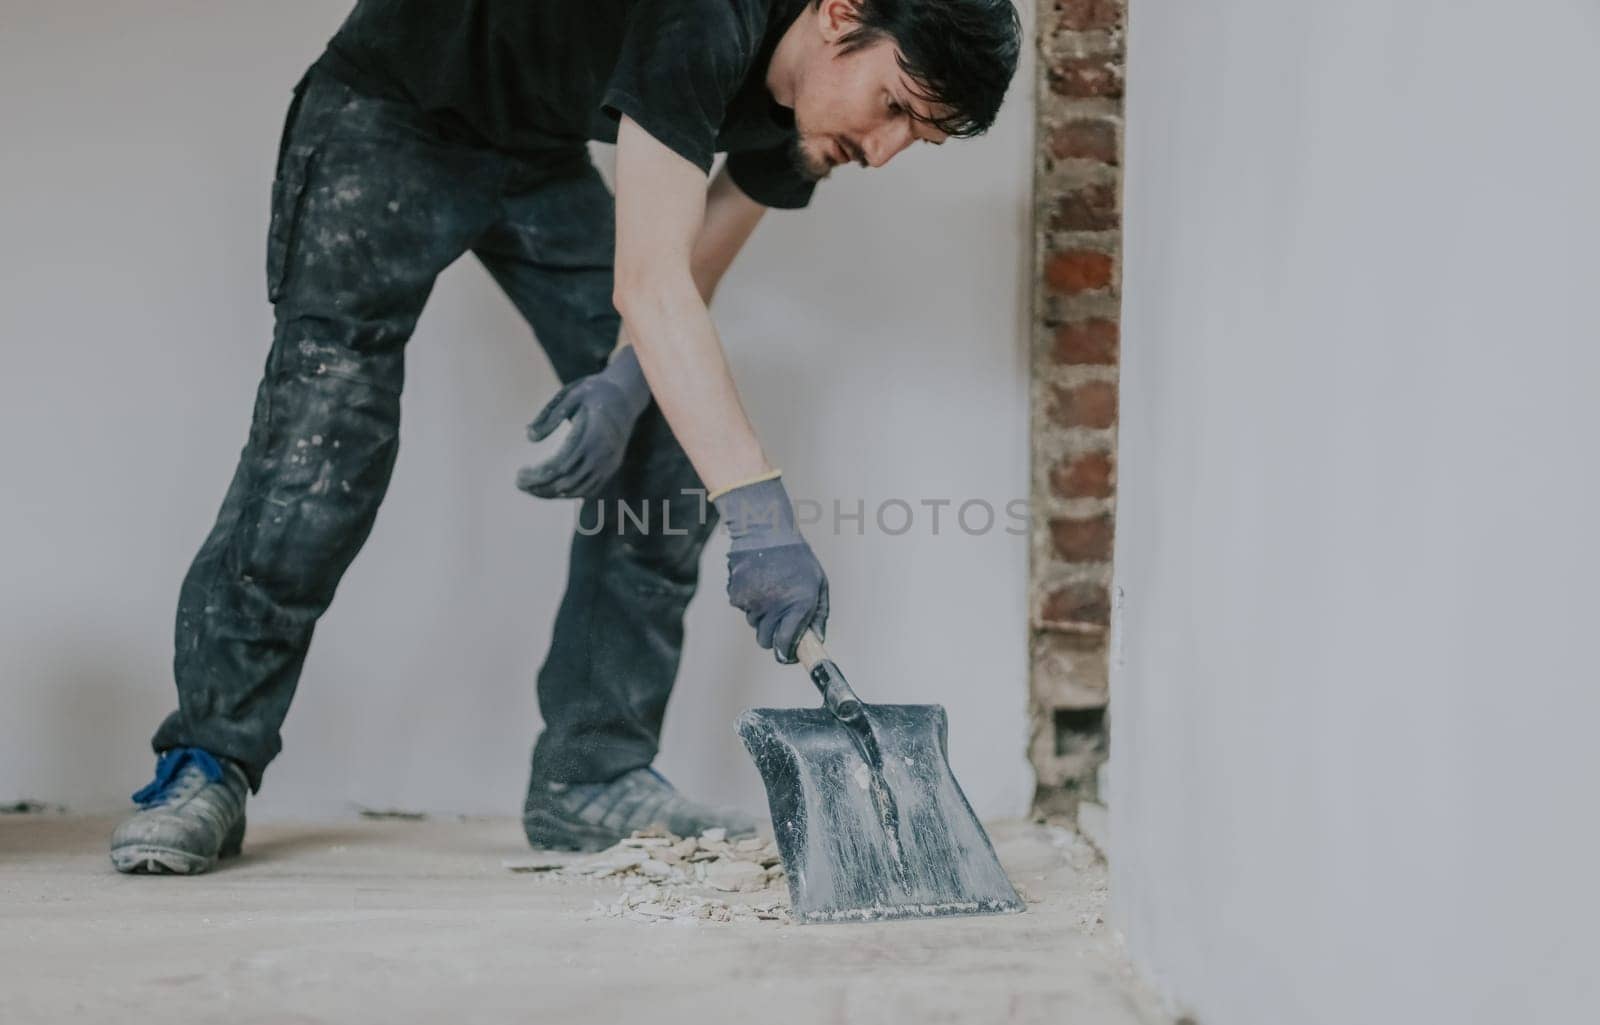 One young handsome brunette Caucasian woman in a black uniform stands, bending over, collecting construction debris from the floor with a shovel, close-up side view.